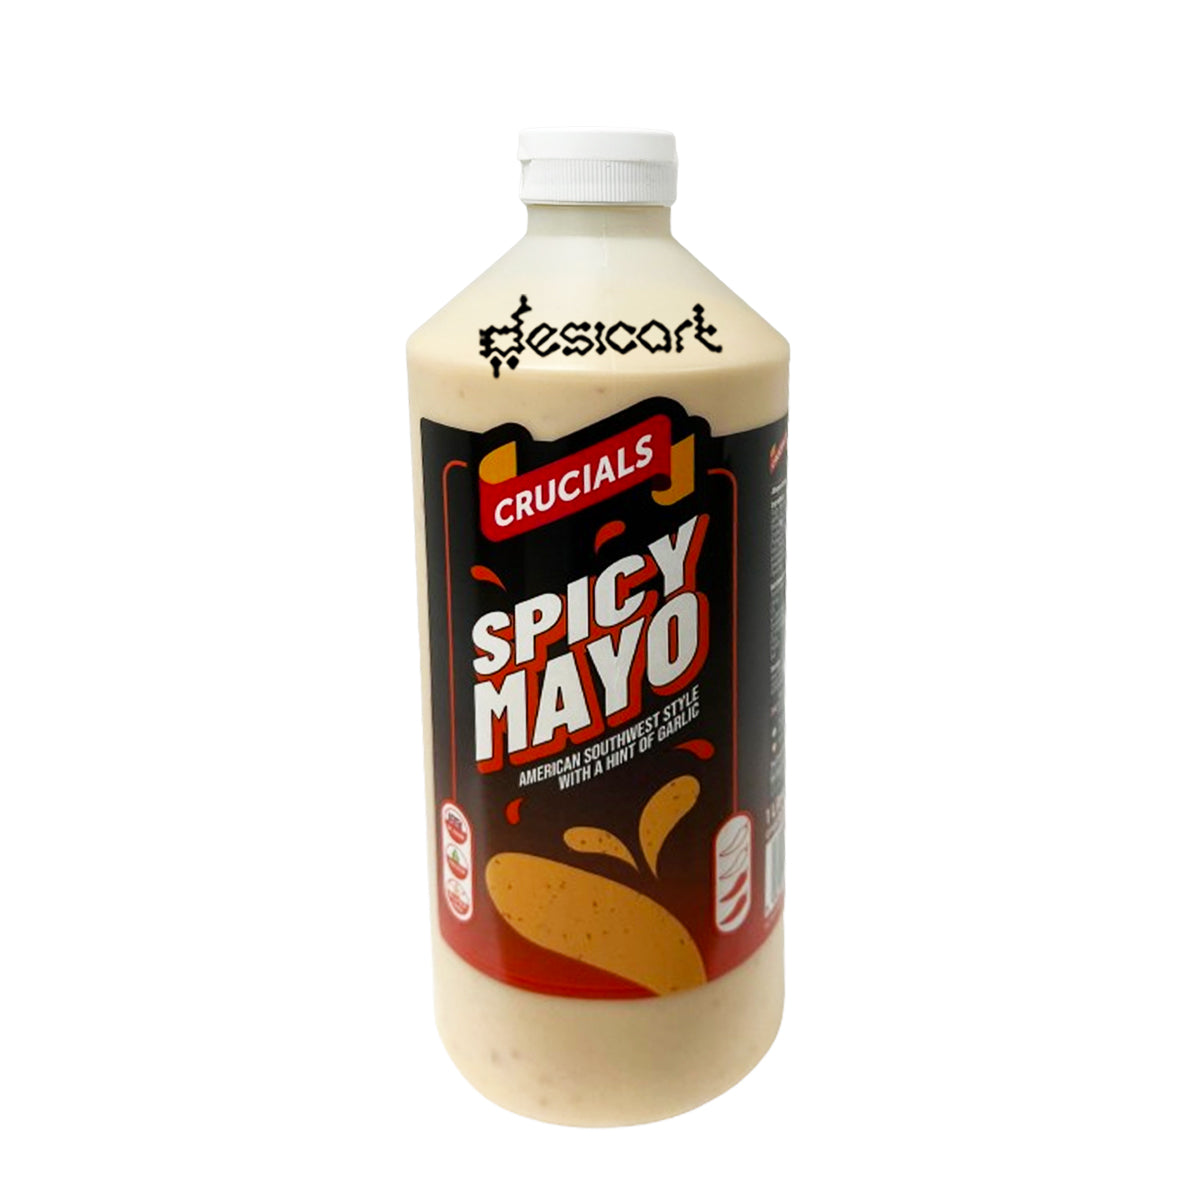 CRUCIAL SPICY MAYO 1LTR